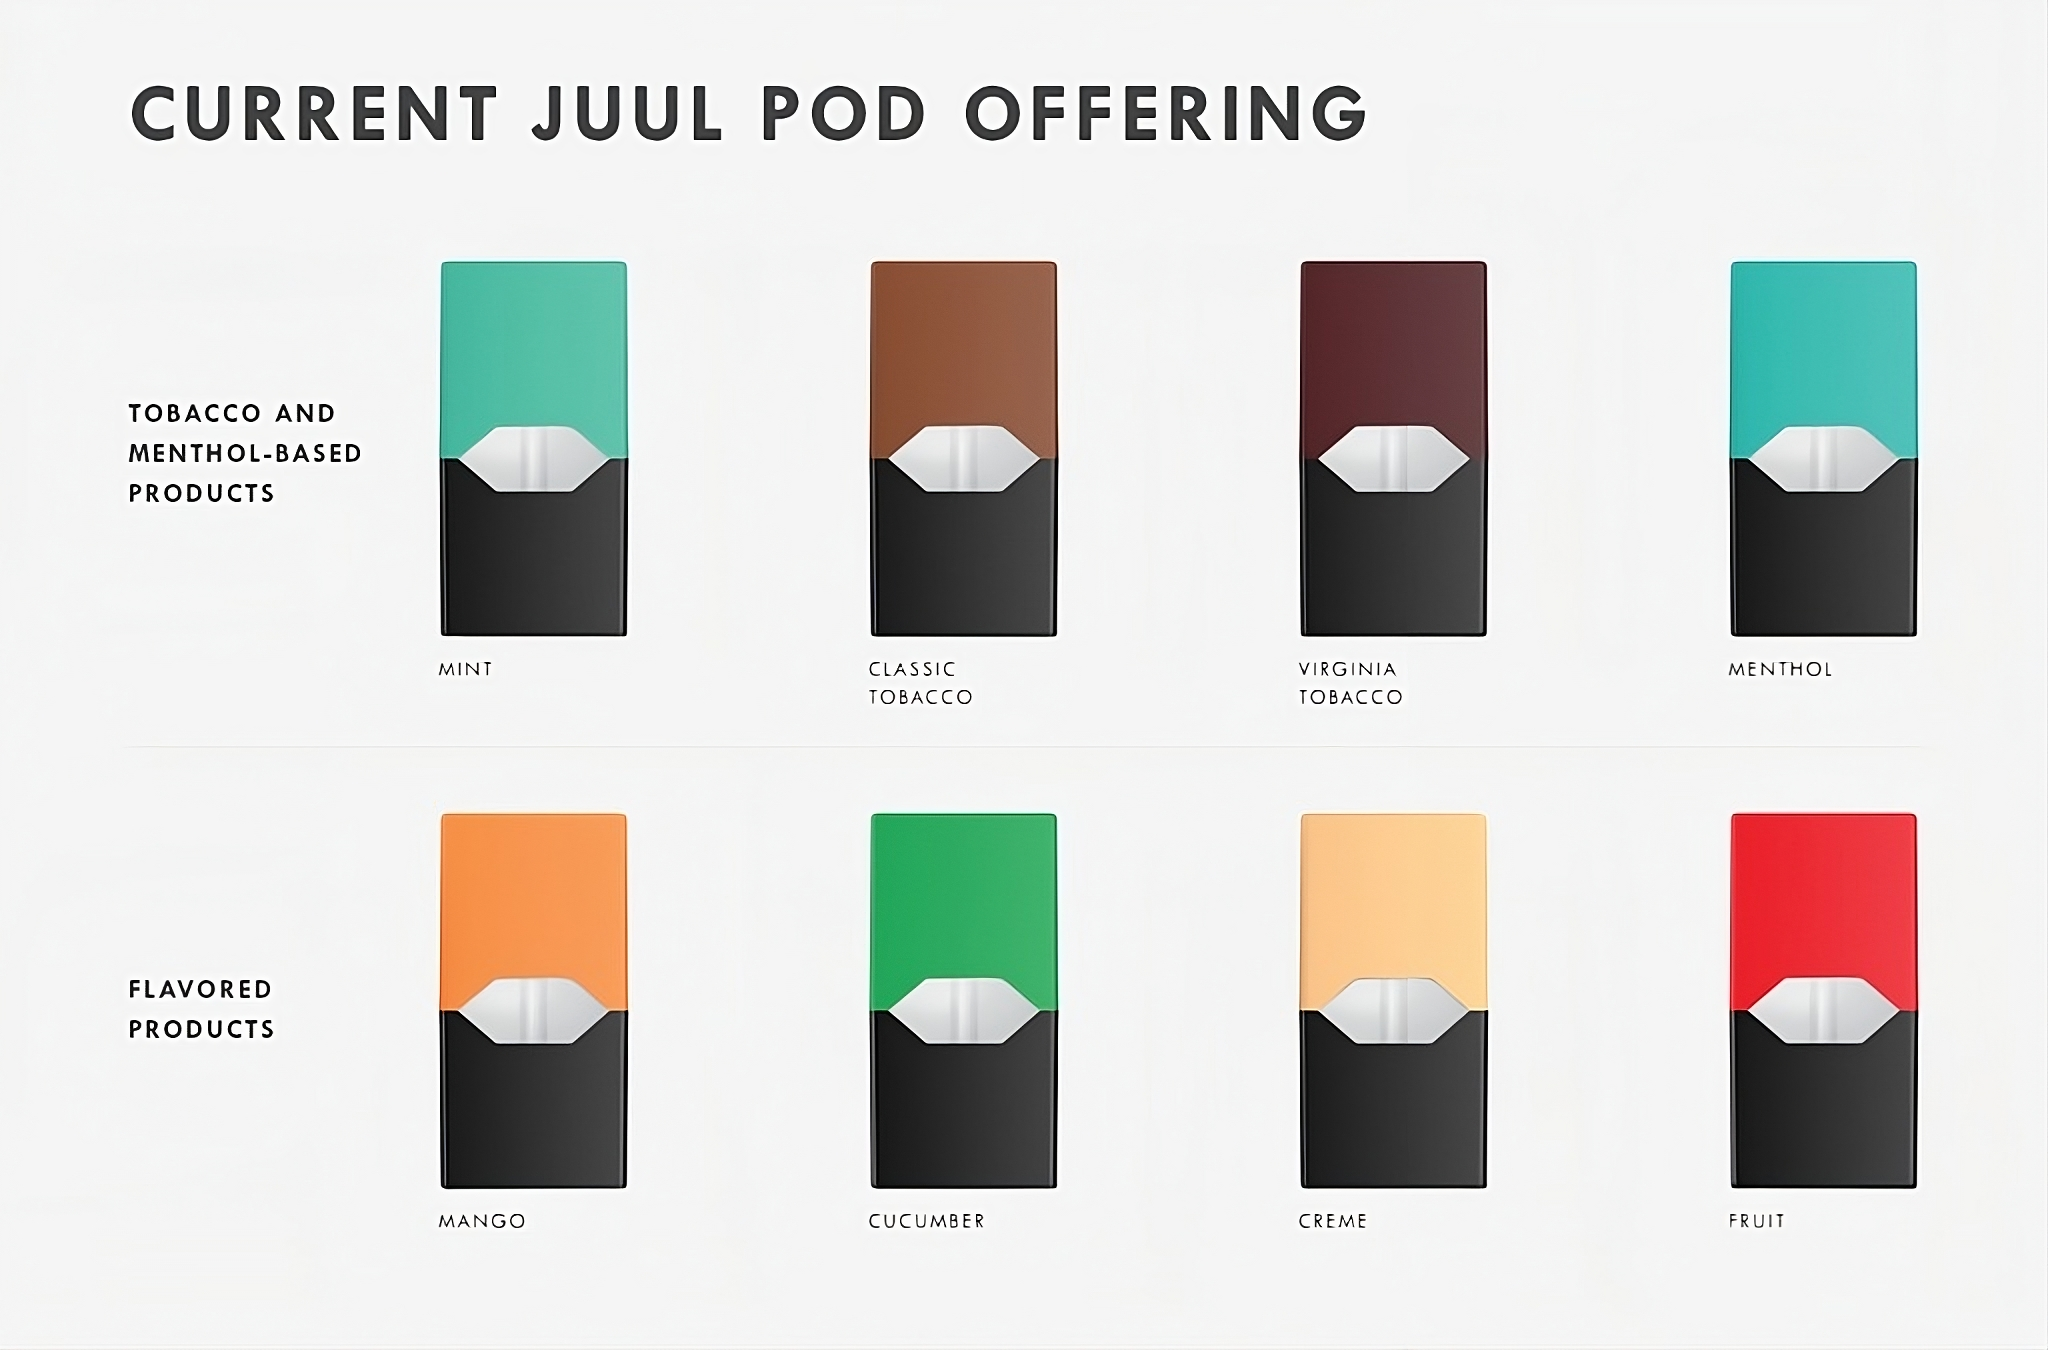 JUUL Pods & Accessories are available at Fusion Vape Shop at the lowest prices. Fusion Vape Shop offers JUUL starter kits and pods directly and free delivery.